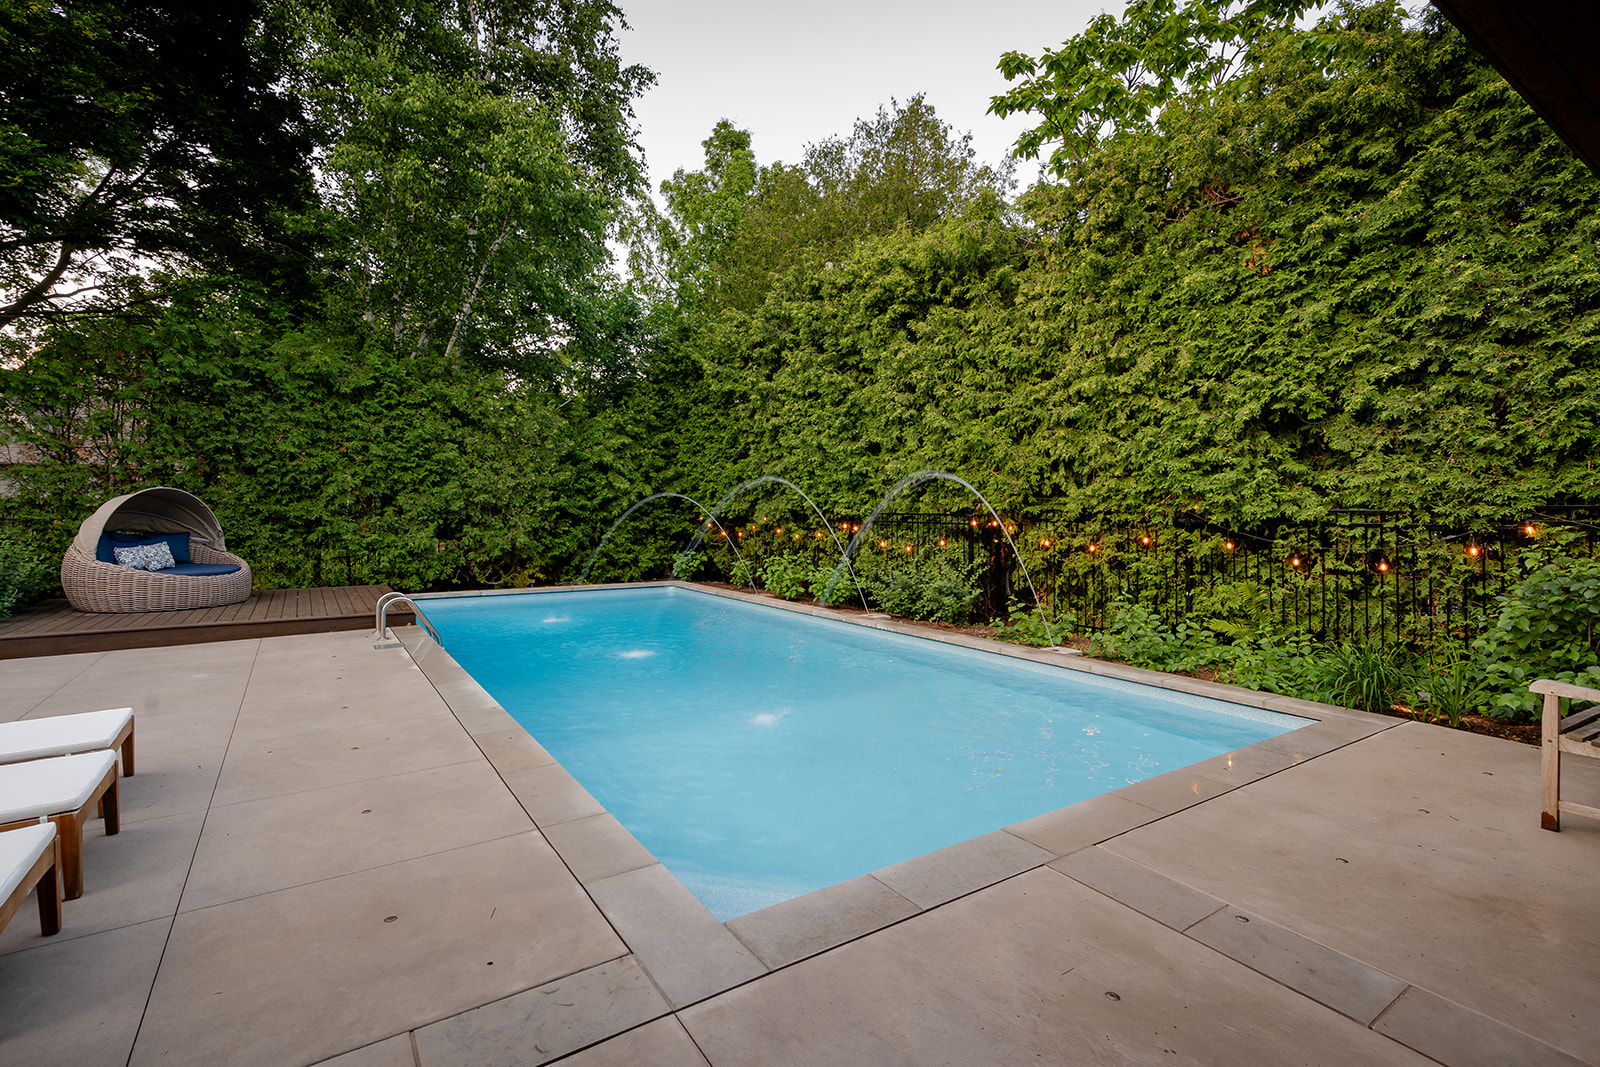 An inground pool with a seating area in the corner.